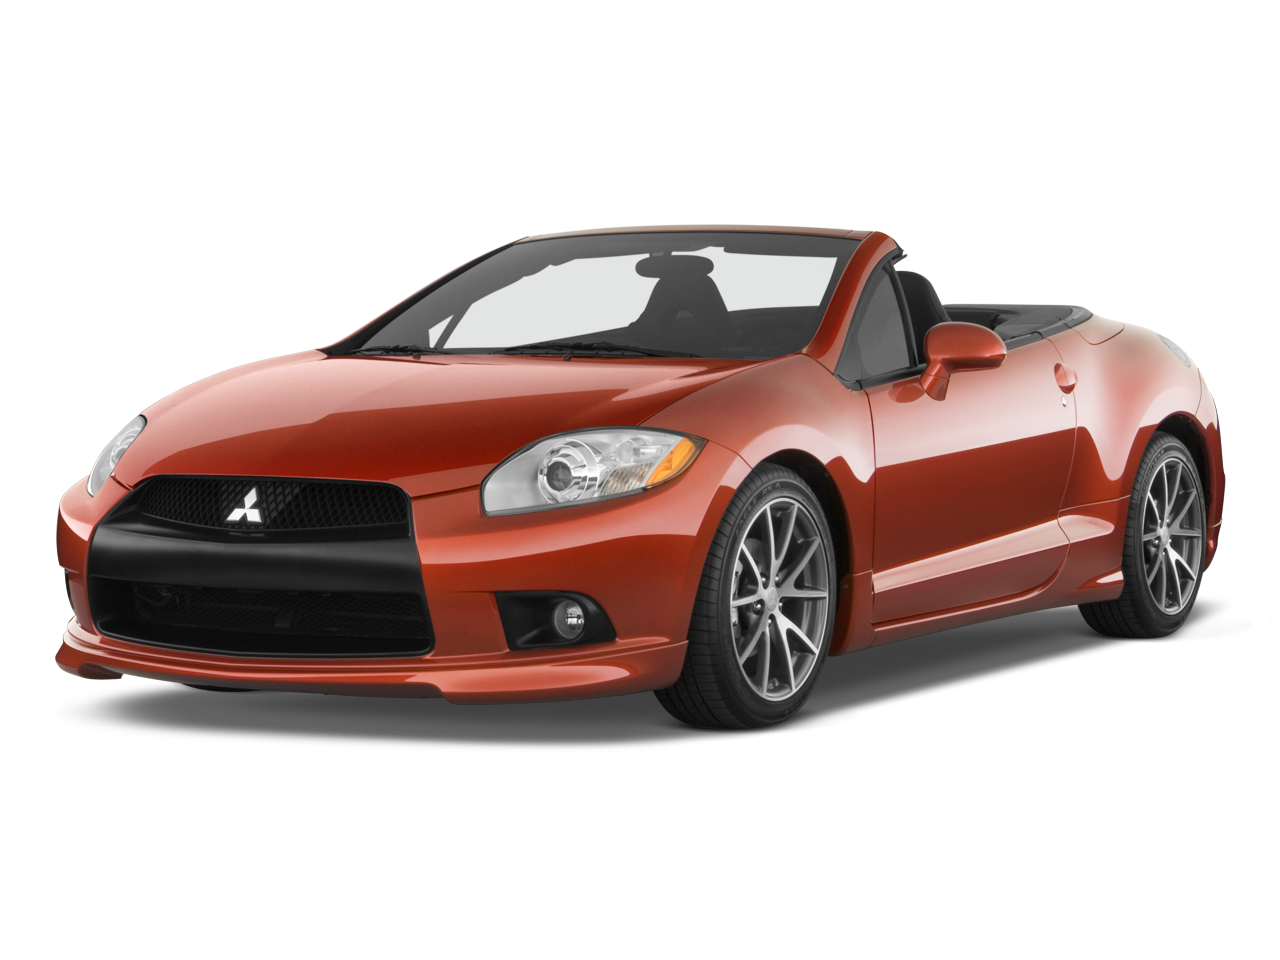 2012 Mitsubishi Eclipse Spyder Prices, Reviews, and Photos - MotorTrend